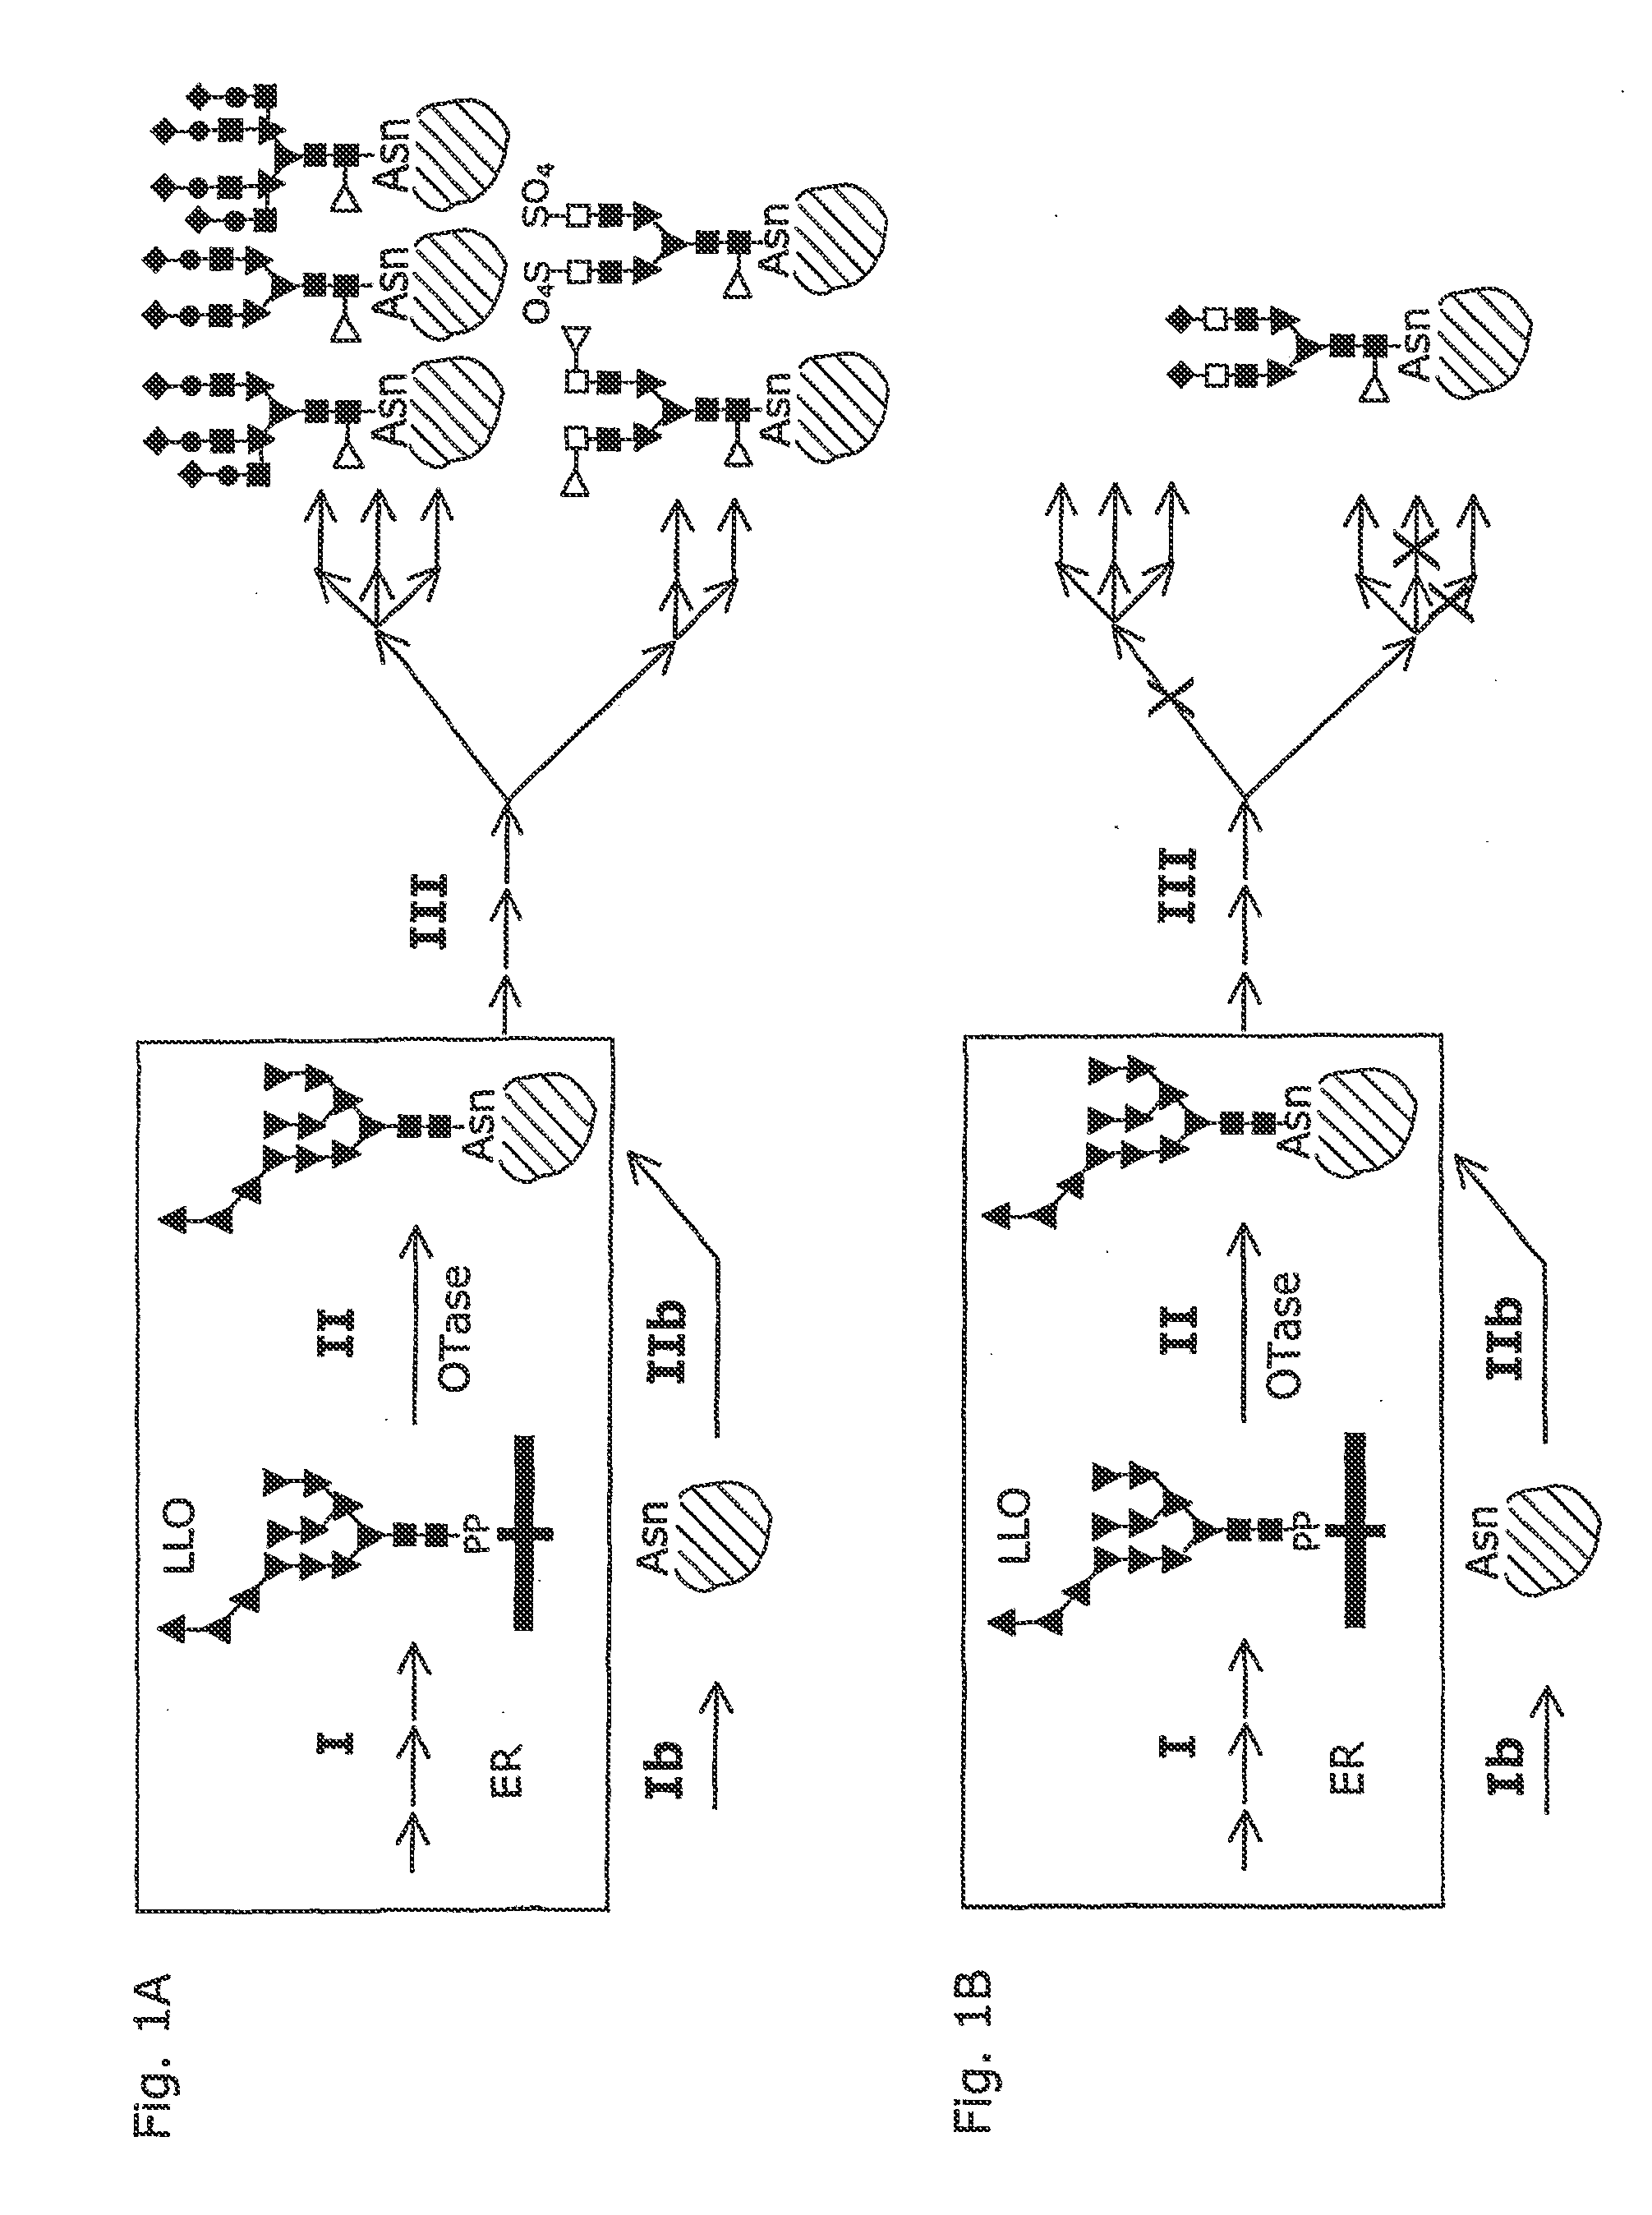 System and method for the production of recombinant glycosylated proteins in a prokaryotic host